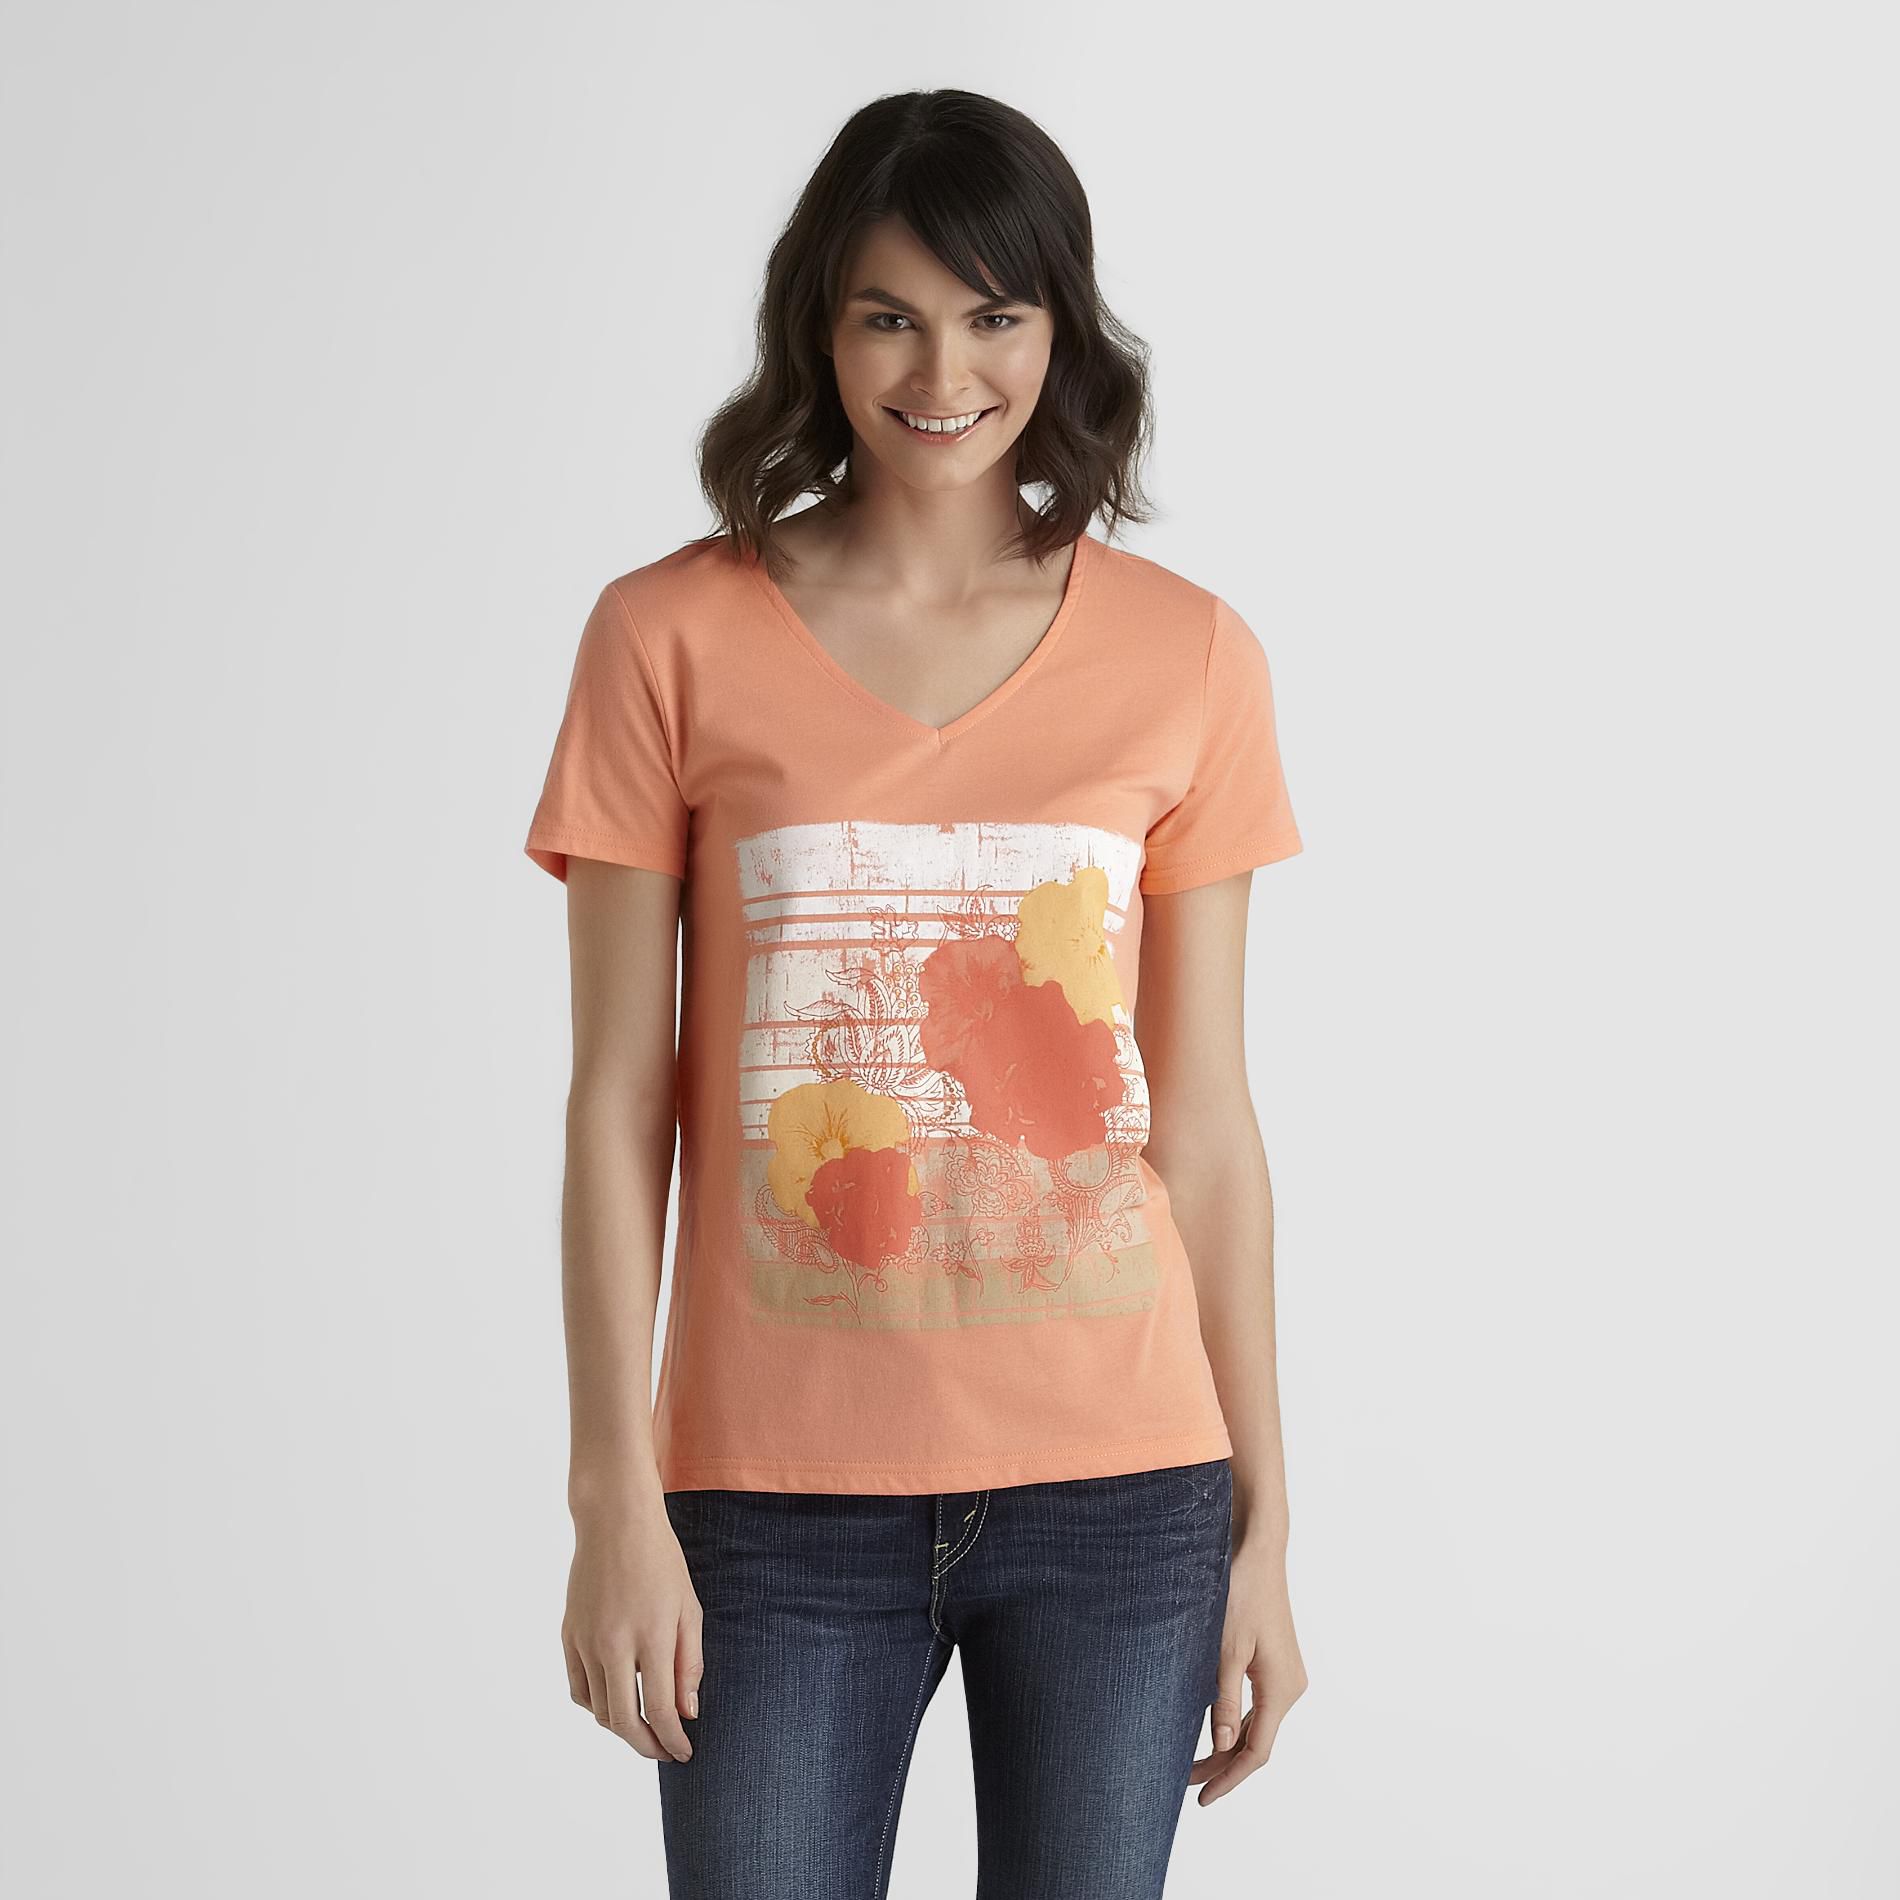 Basic Editions Women's Graphic T-Shirt - Flowers